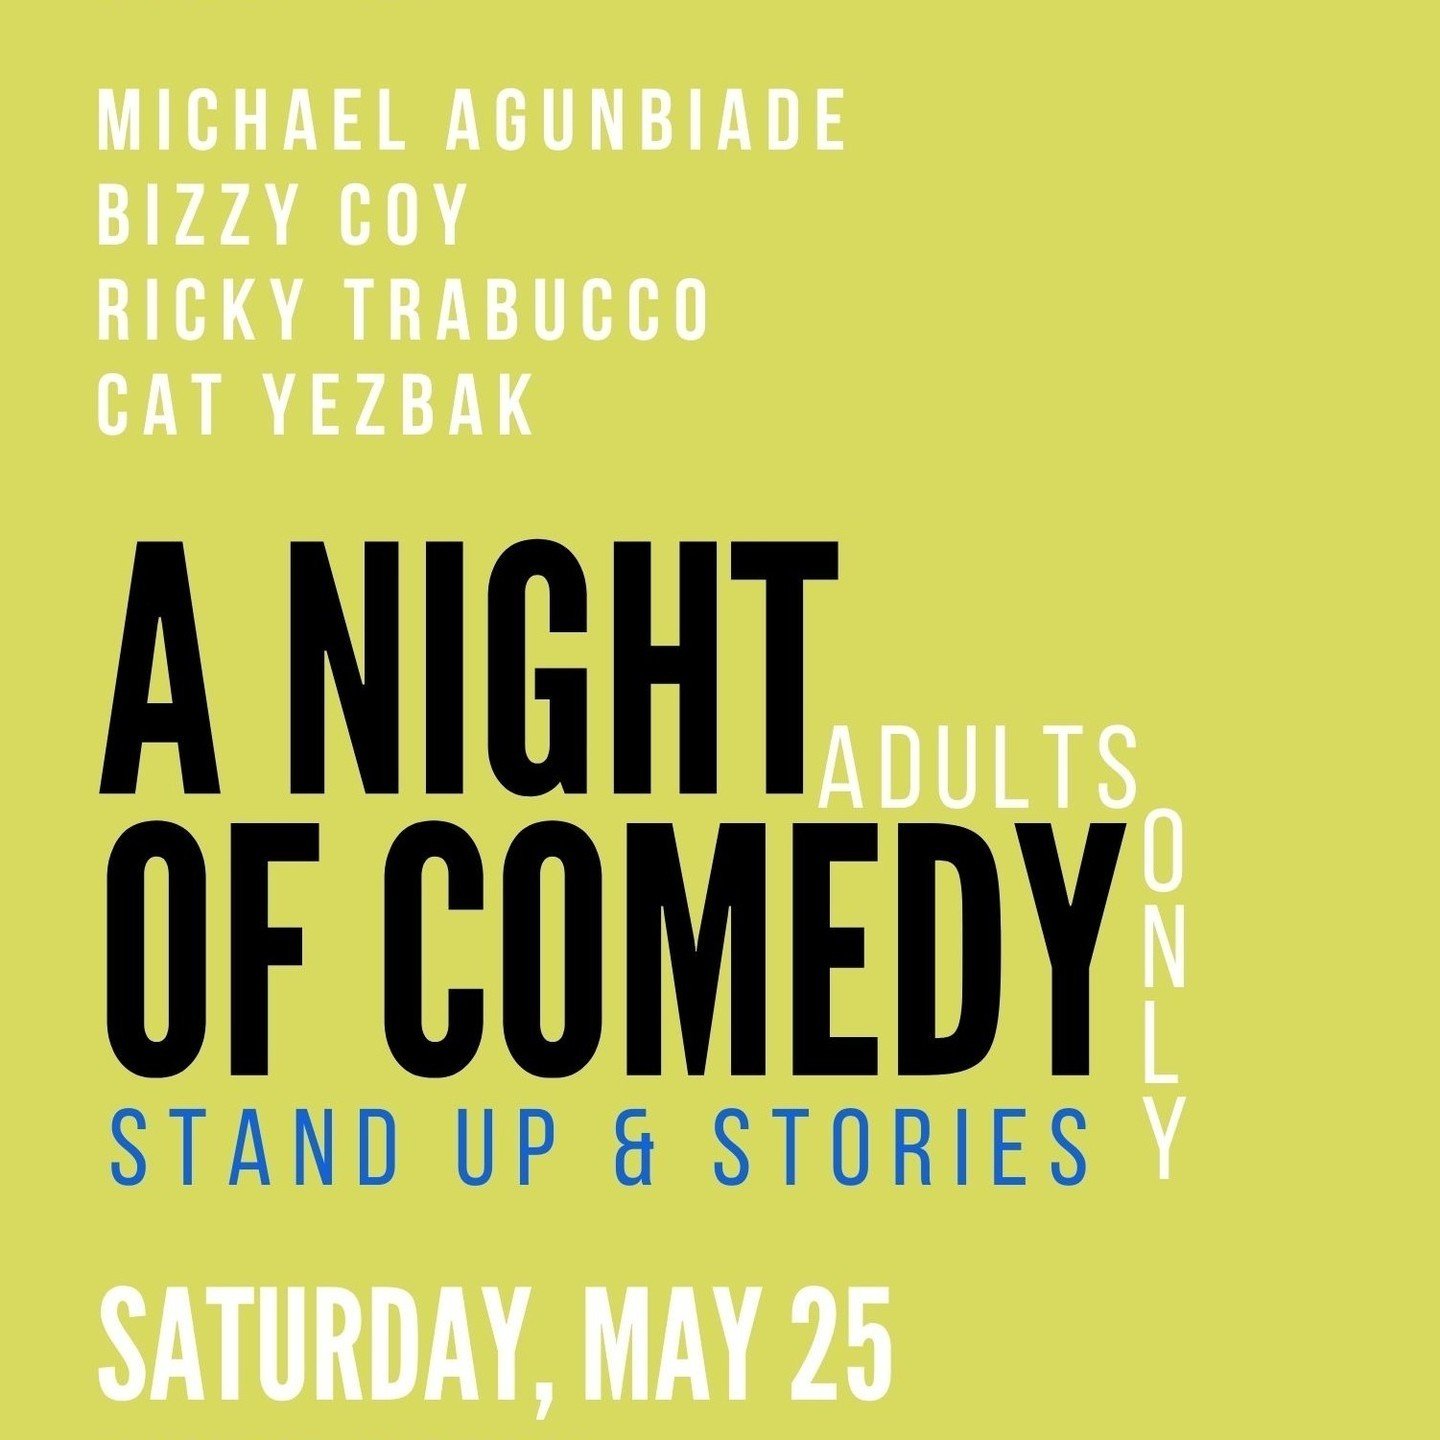 🎟️ Tickets now on sale! 

🎙️ A night of comedy, stand-up, and captivating stories by the talented Michael Agunbiade, Bizzy Coy, Ricky Trabucco, and Cat Yezbak. 

Don't miss out on a fun-filled evening Saturday, May 25 at 7 pm! 
 
📍 Tusten Theatre,